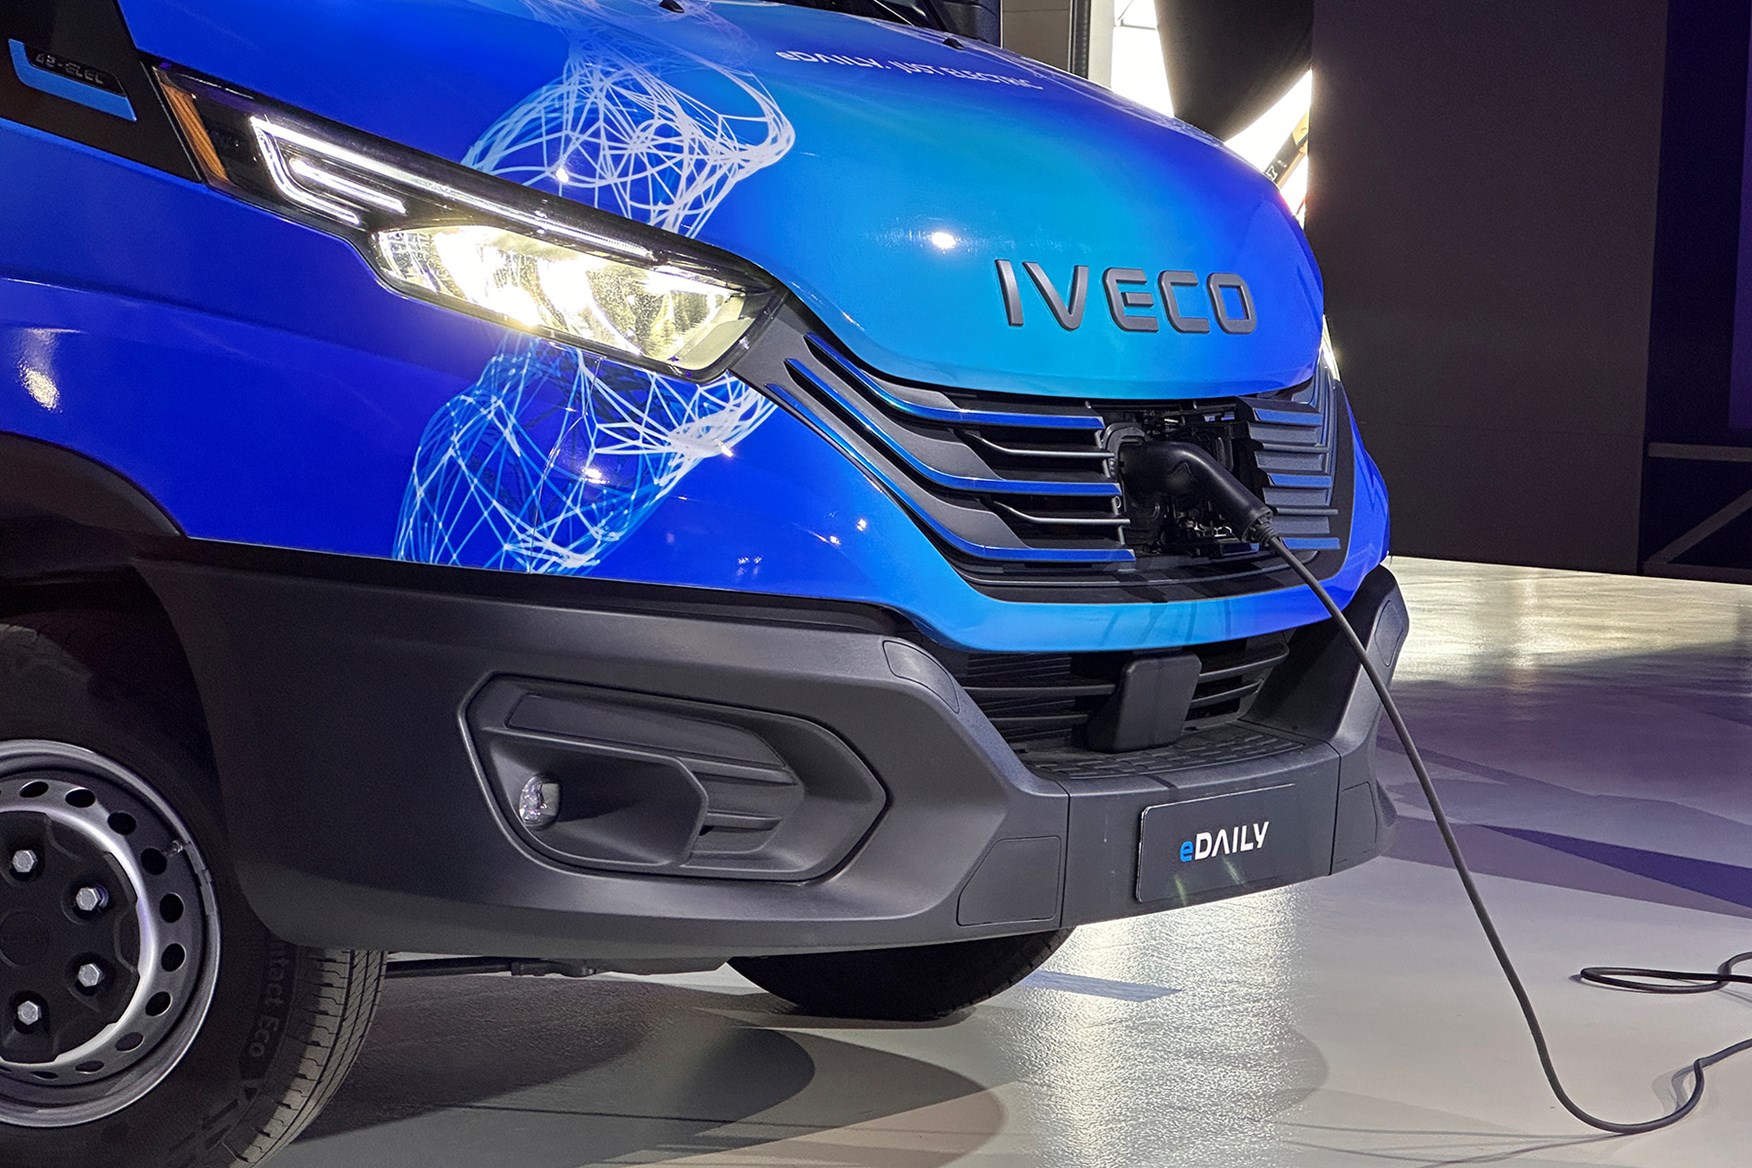 2023 Iveco eDaily charging